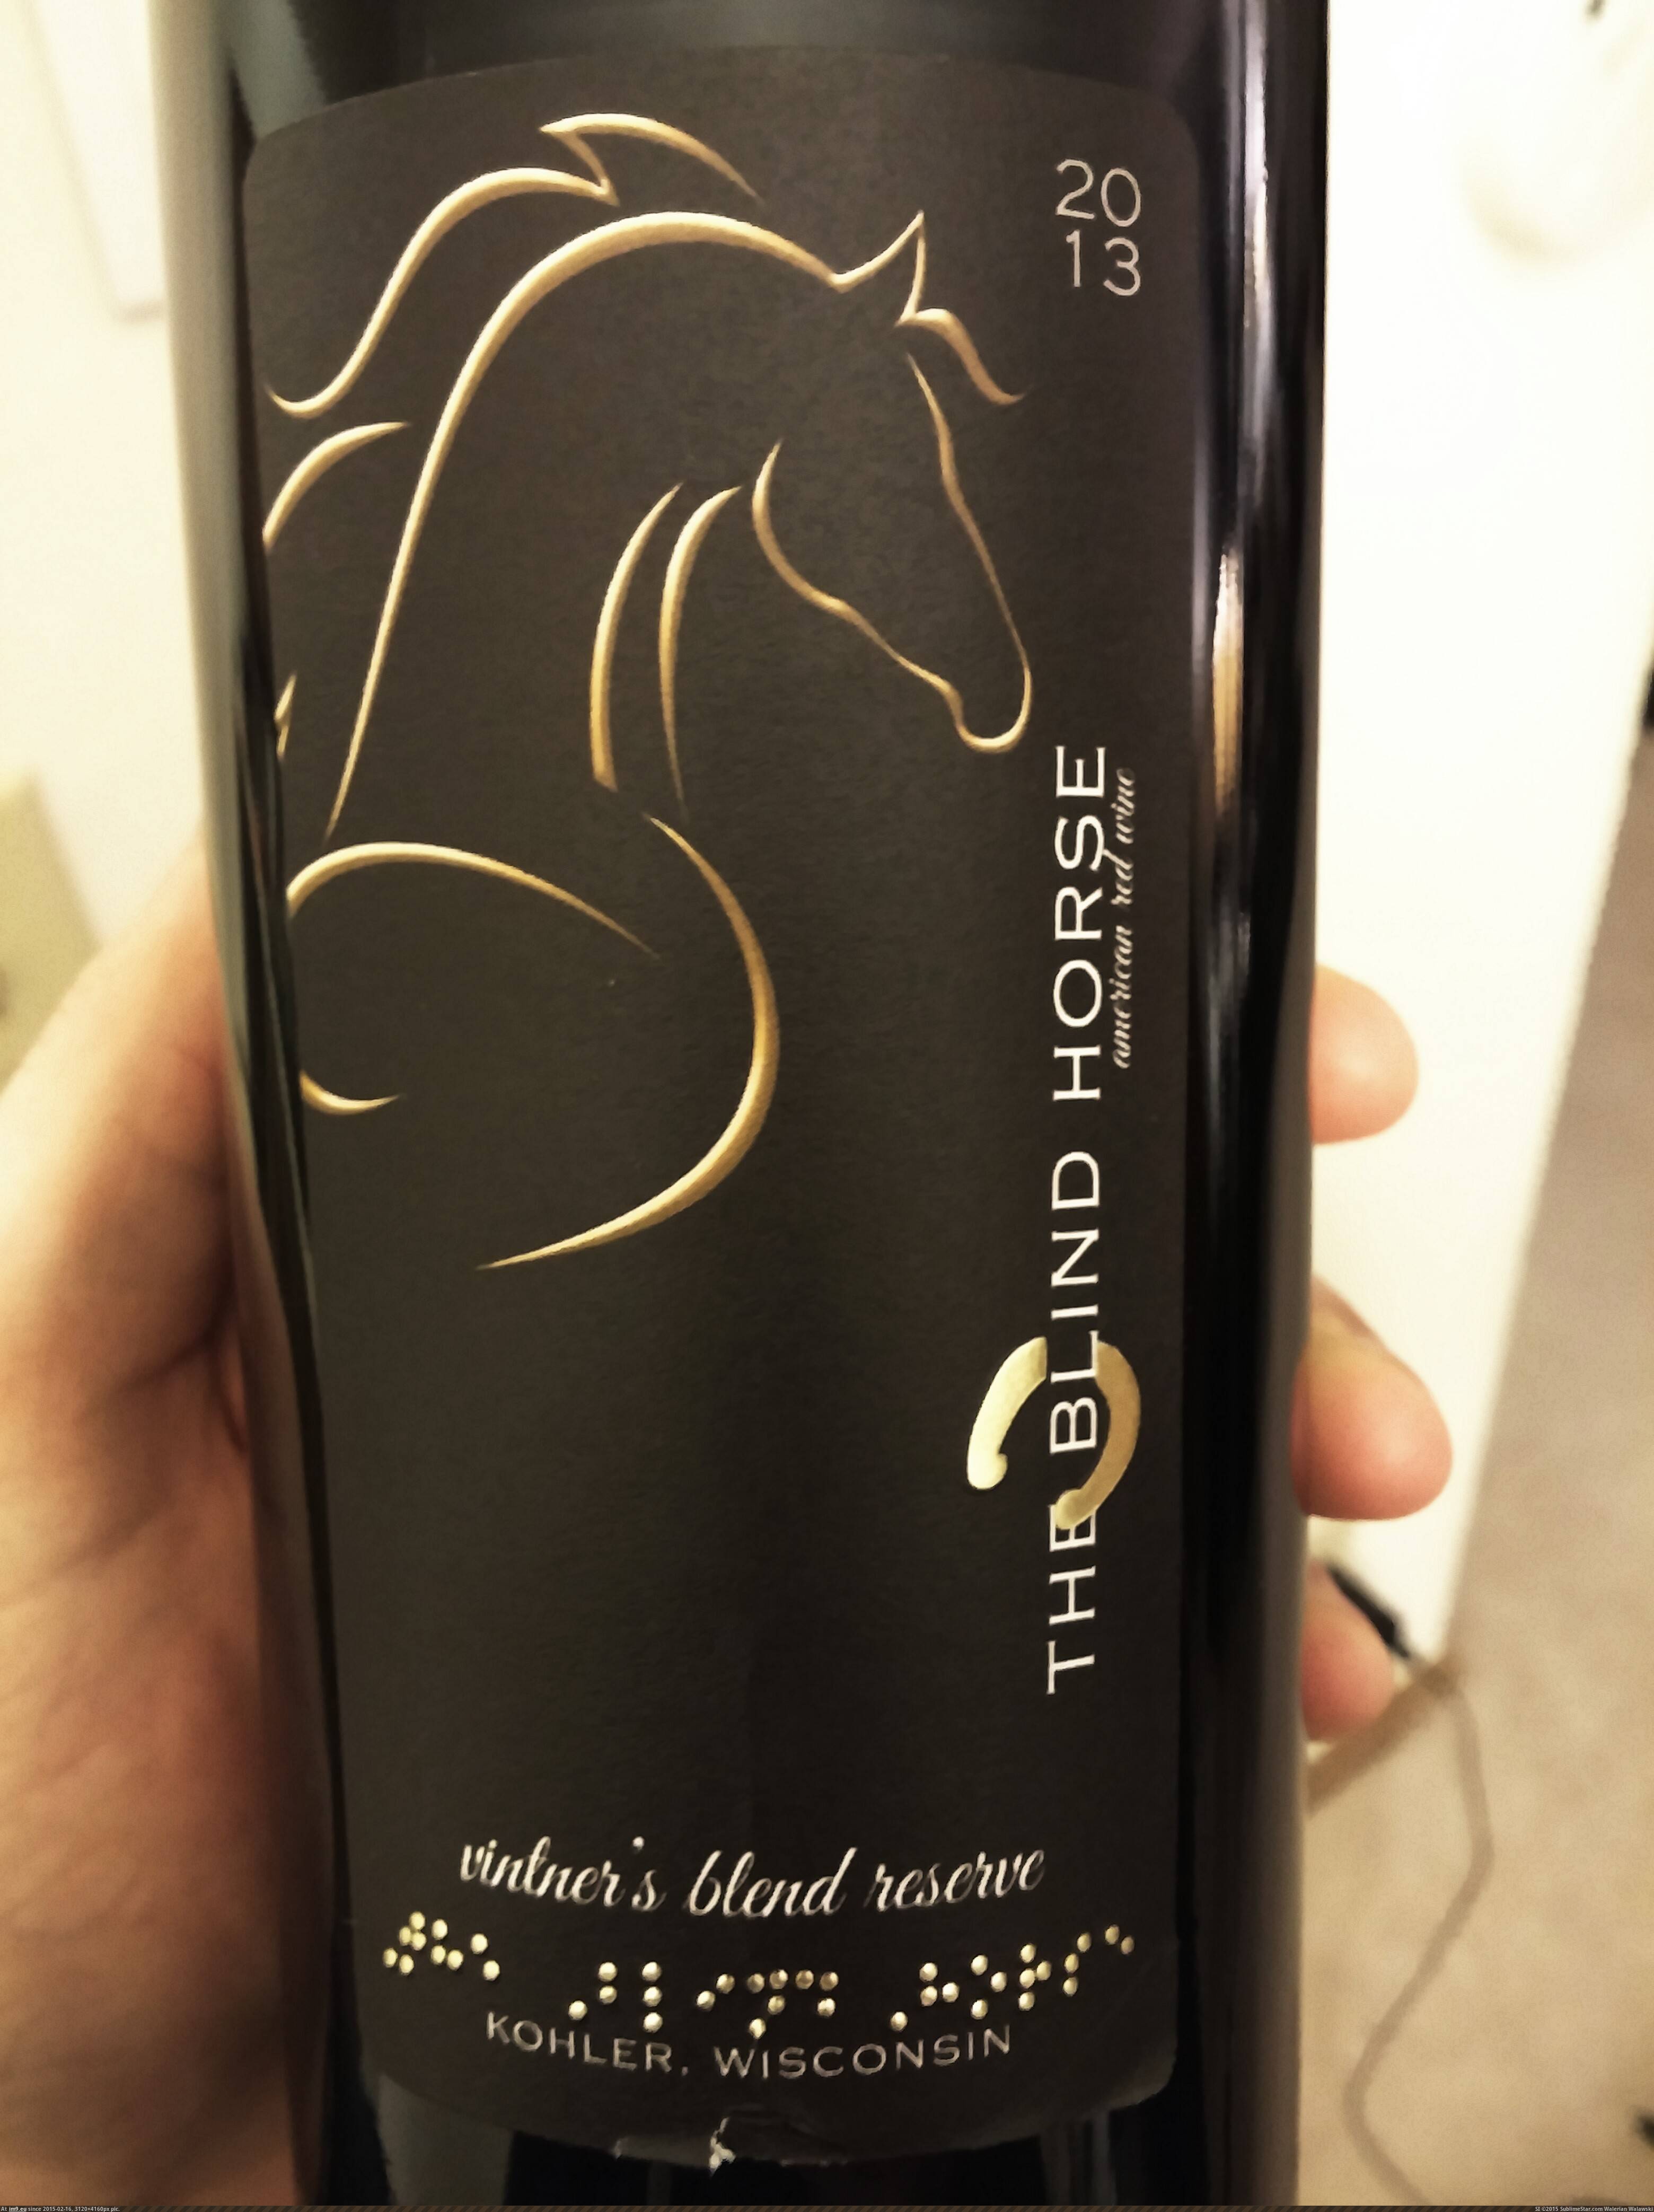 [Mildlyinteresting] This wine bottle label has actual raised Braille dots to honor the name of the winery, 'The Blind Horse.' (in My r/MILDLYINTERESTING favs)